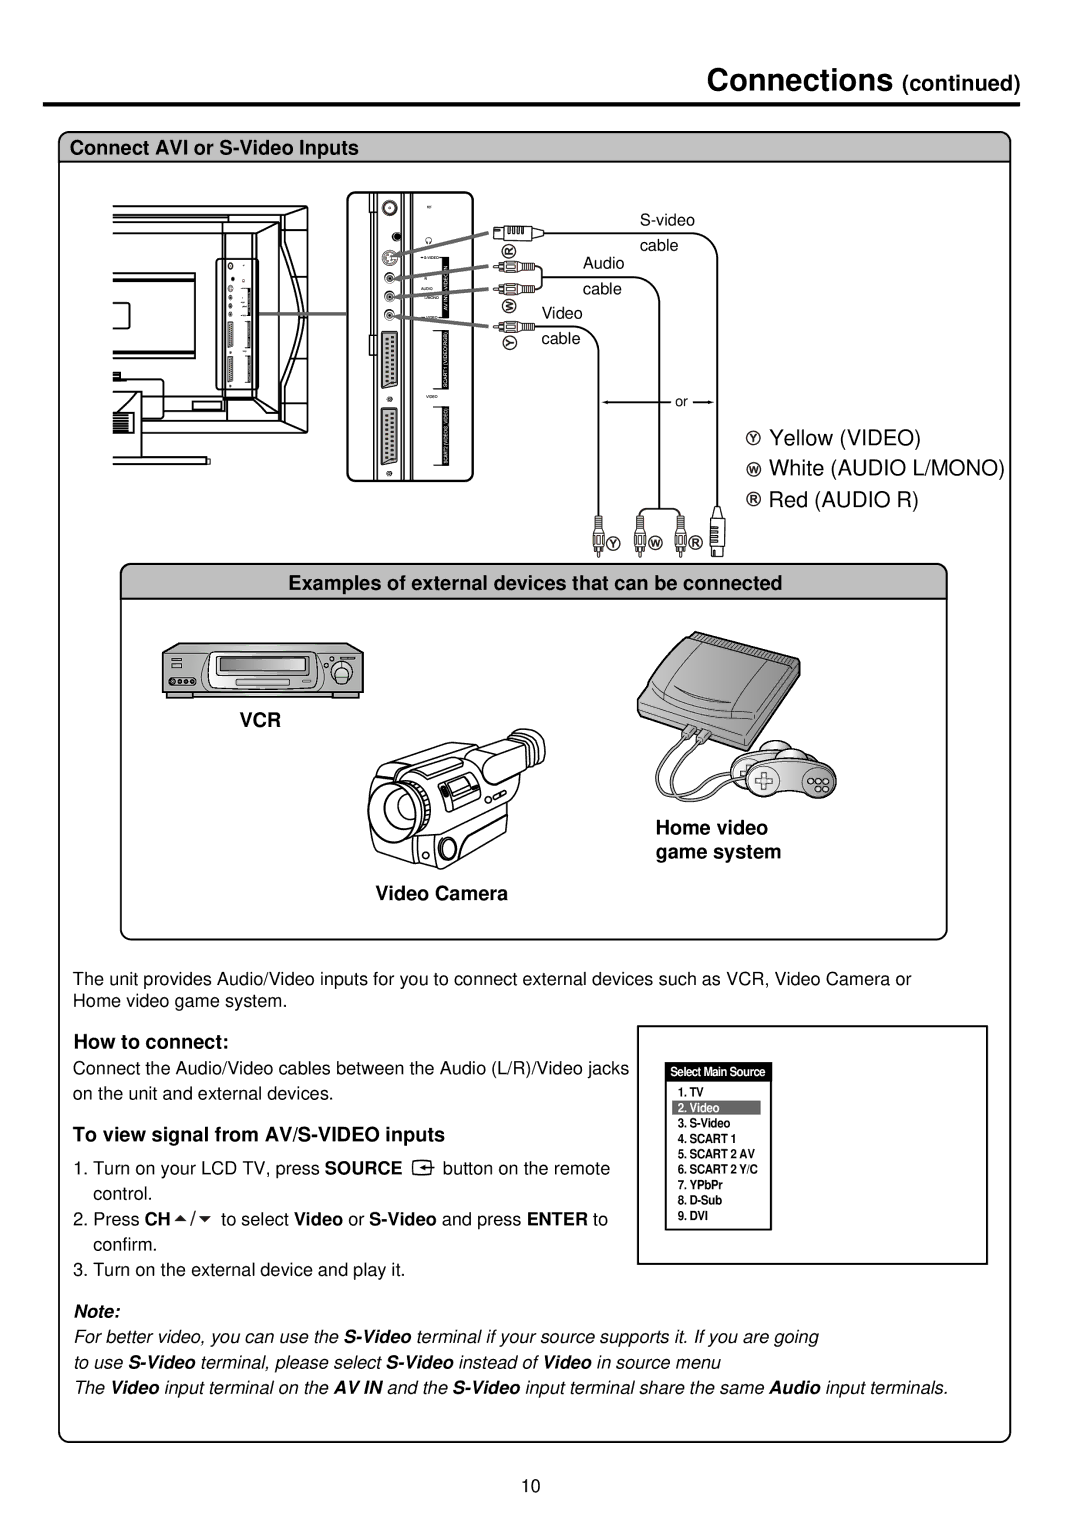 Palsonic TFTV680 owner manual Connect AVI or S-Video Inputs, Examples of external devices that can be connected 